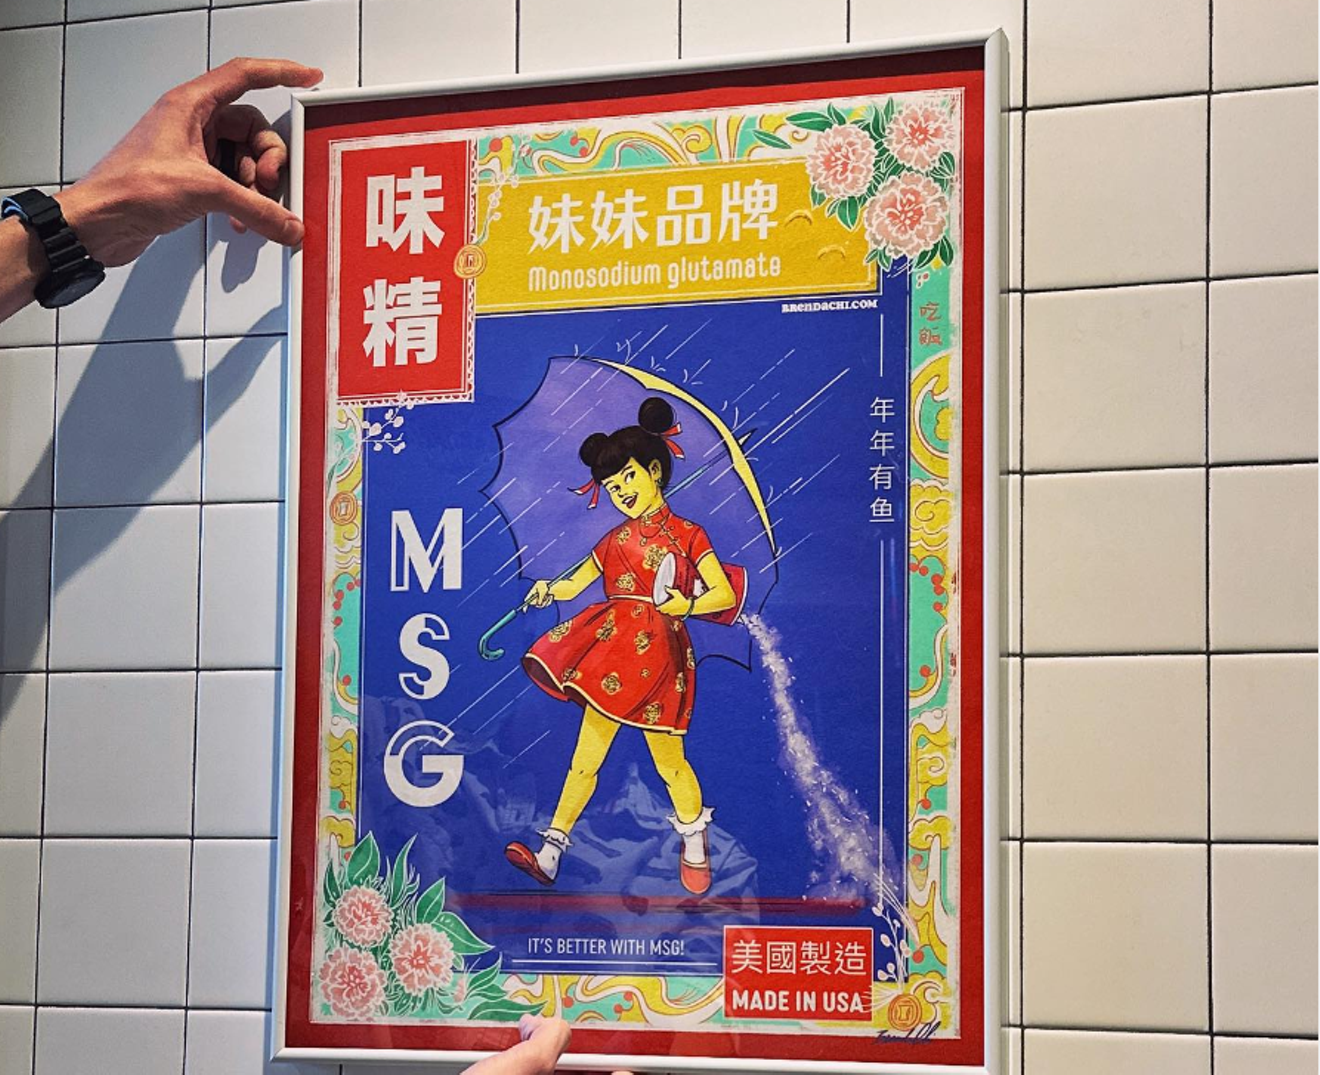 Artist Brenda Chi created the MSG Girl poster that hangs on a wall at MAKfam.